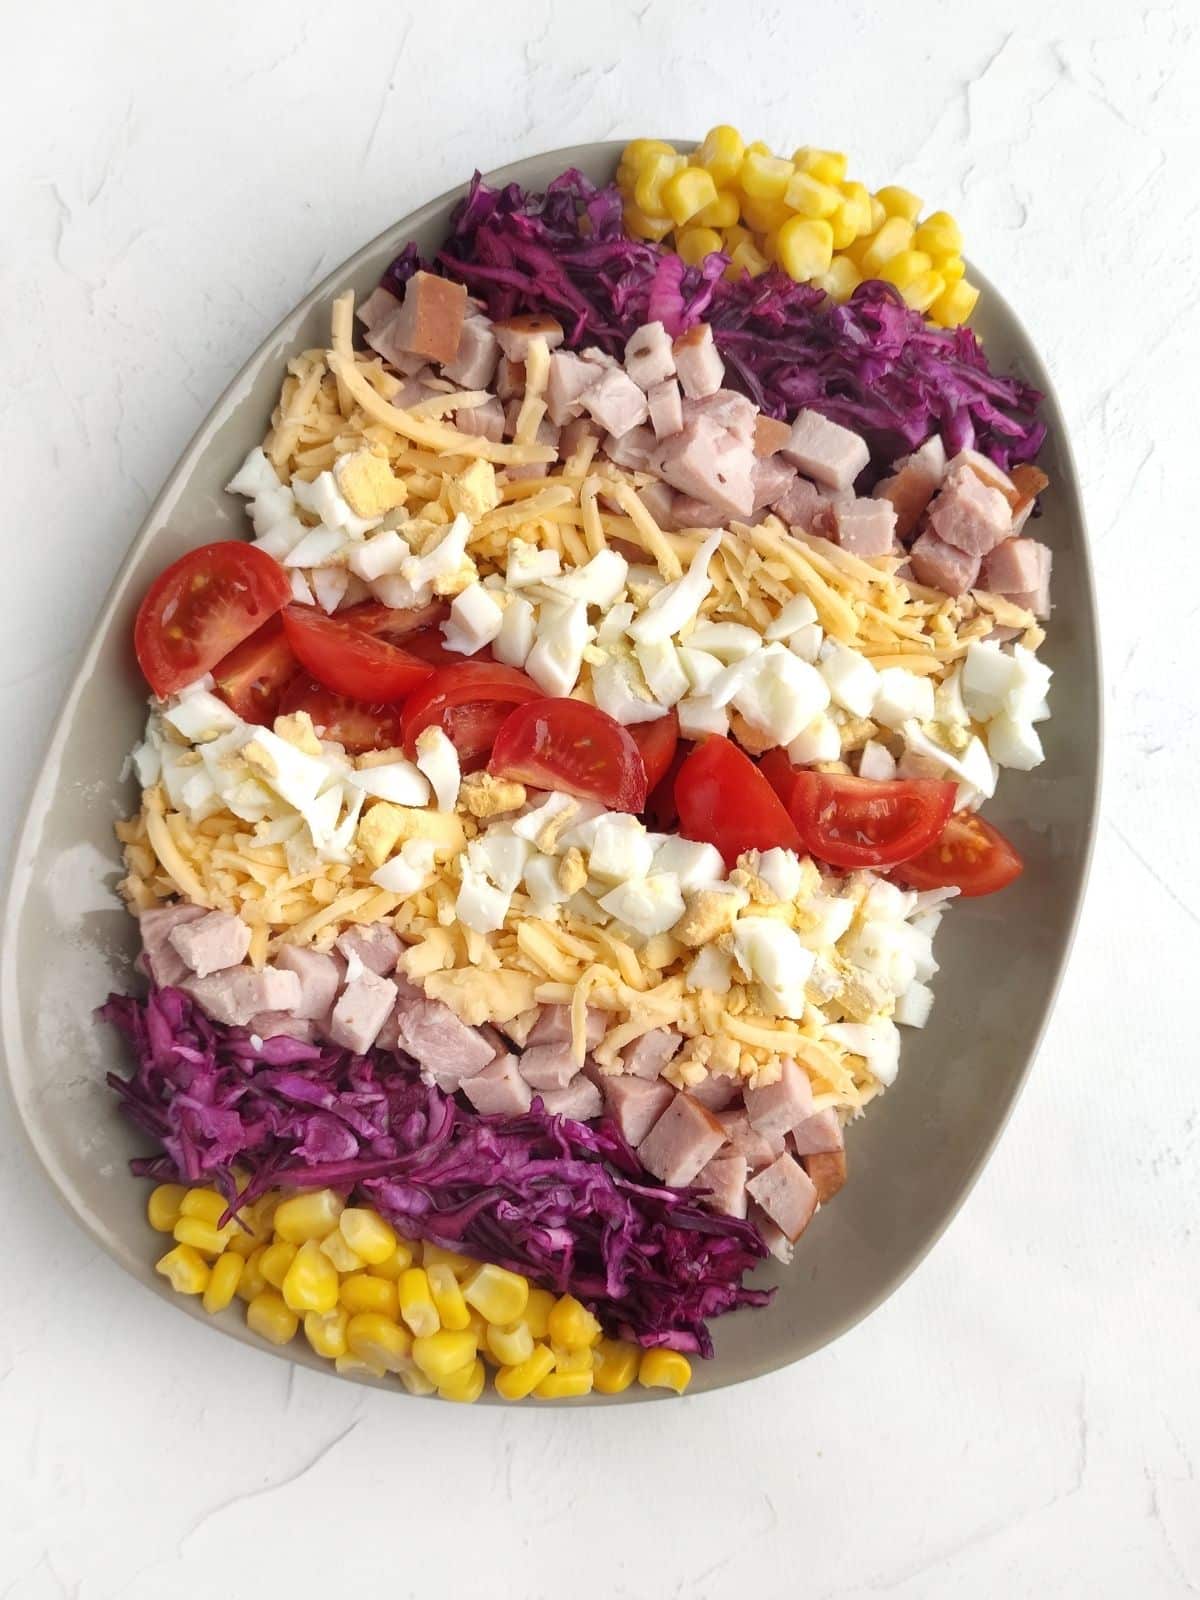 Salad on egg shaped plate with corn, red cabbage, tomato, cheese and ham.